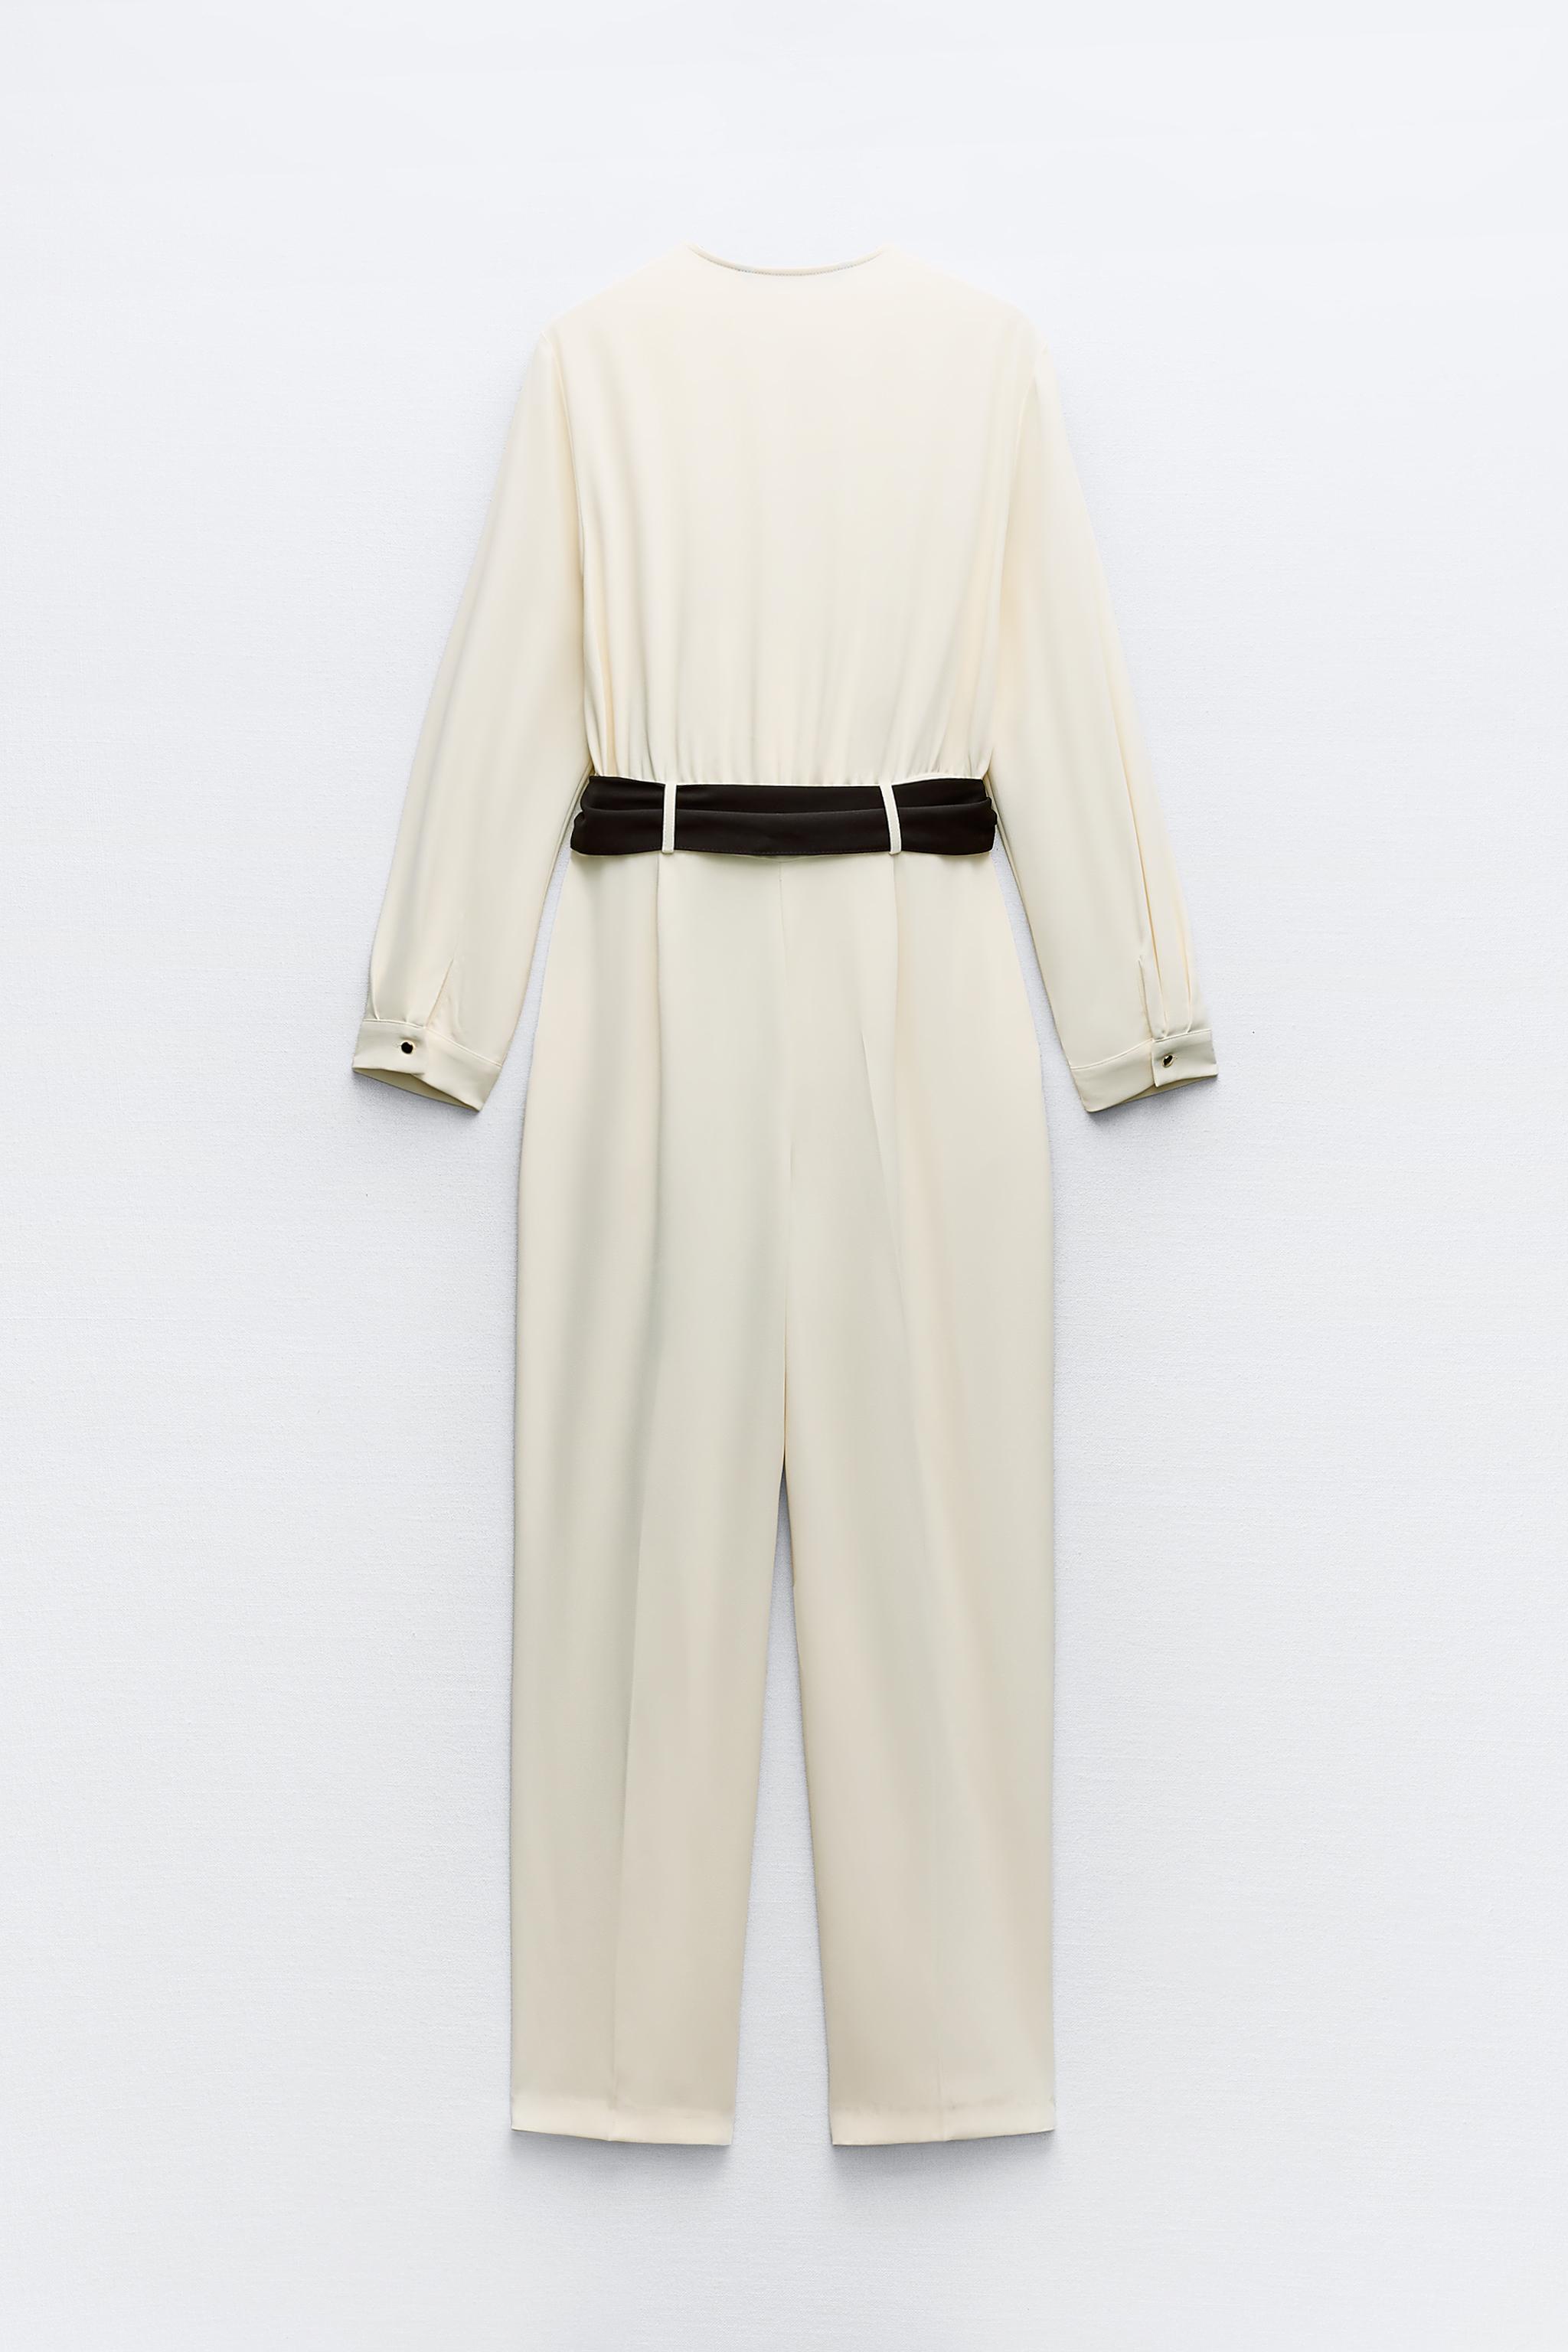 Zara fans rushing to buy seamless jumpsuit with standout feature - and it  costs just €39.95